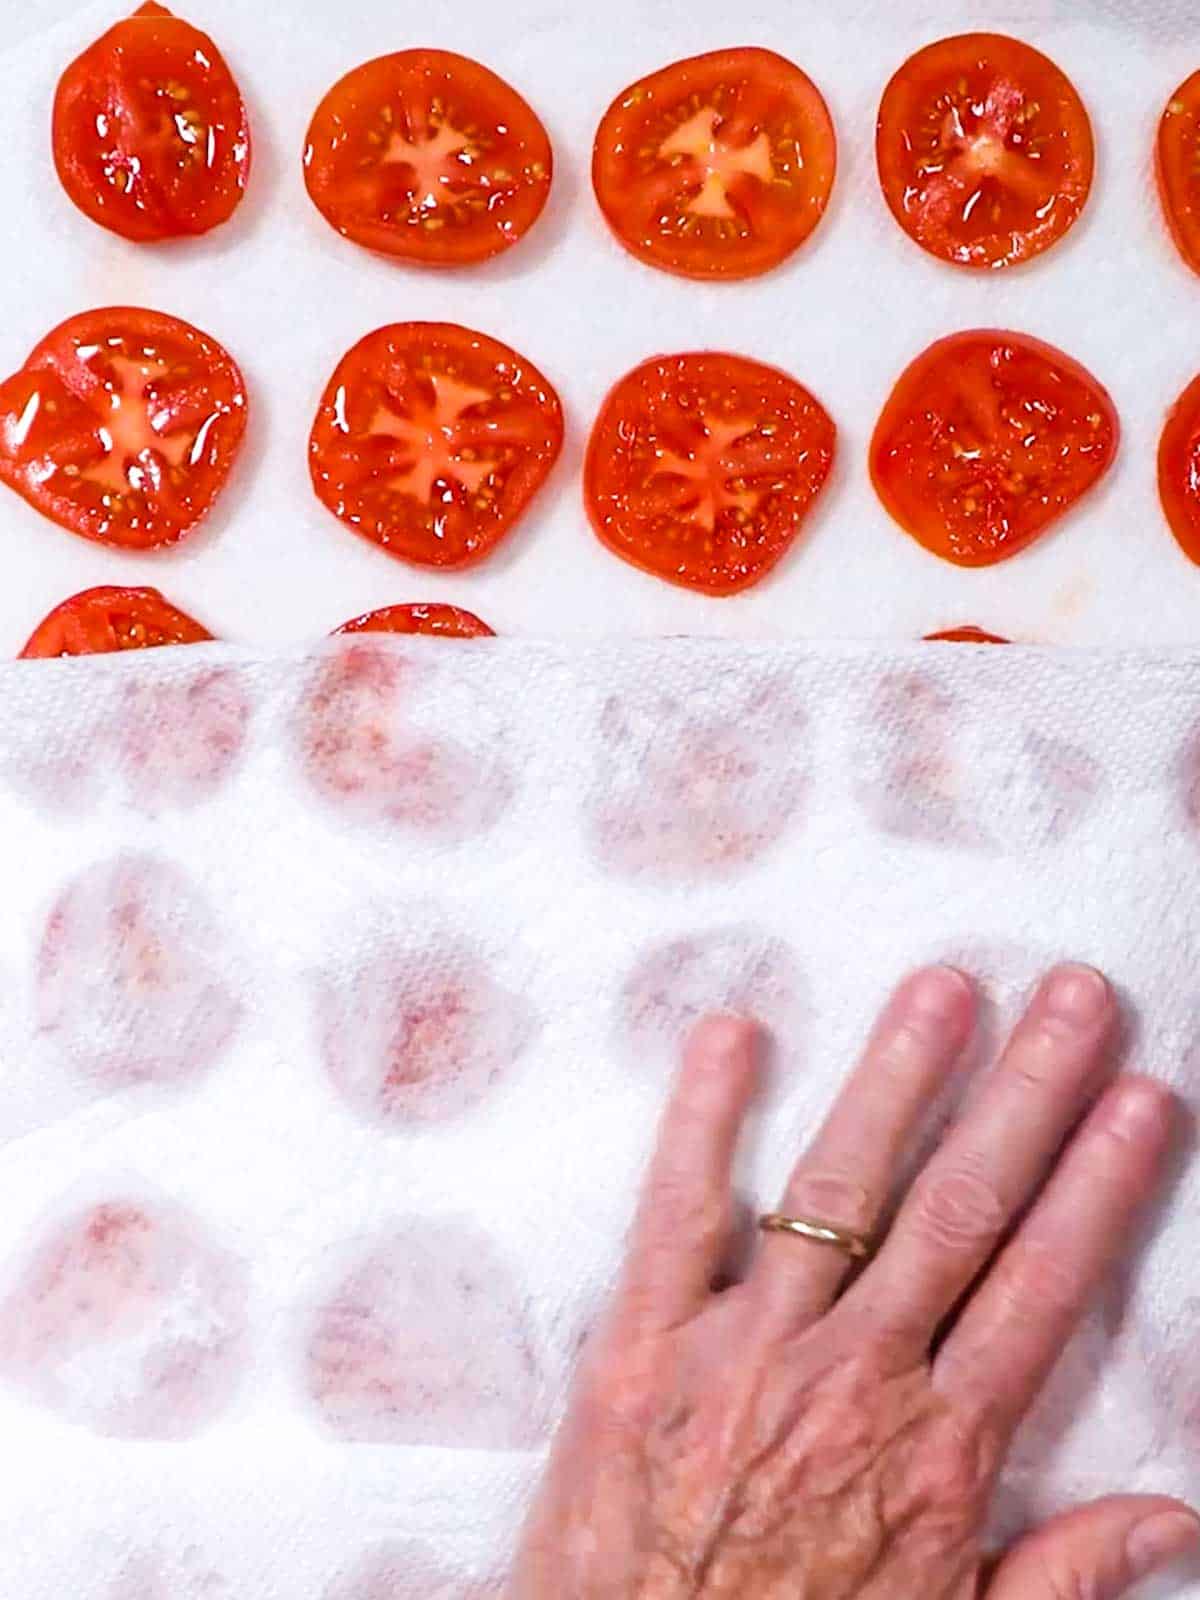 Blotting tomatoes with paper towel.